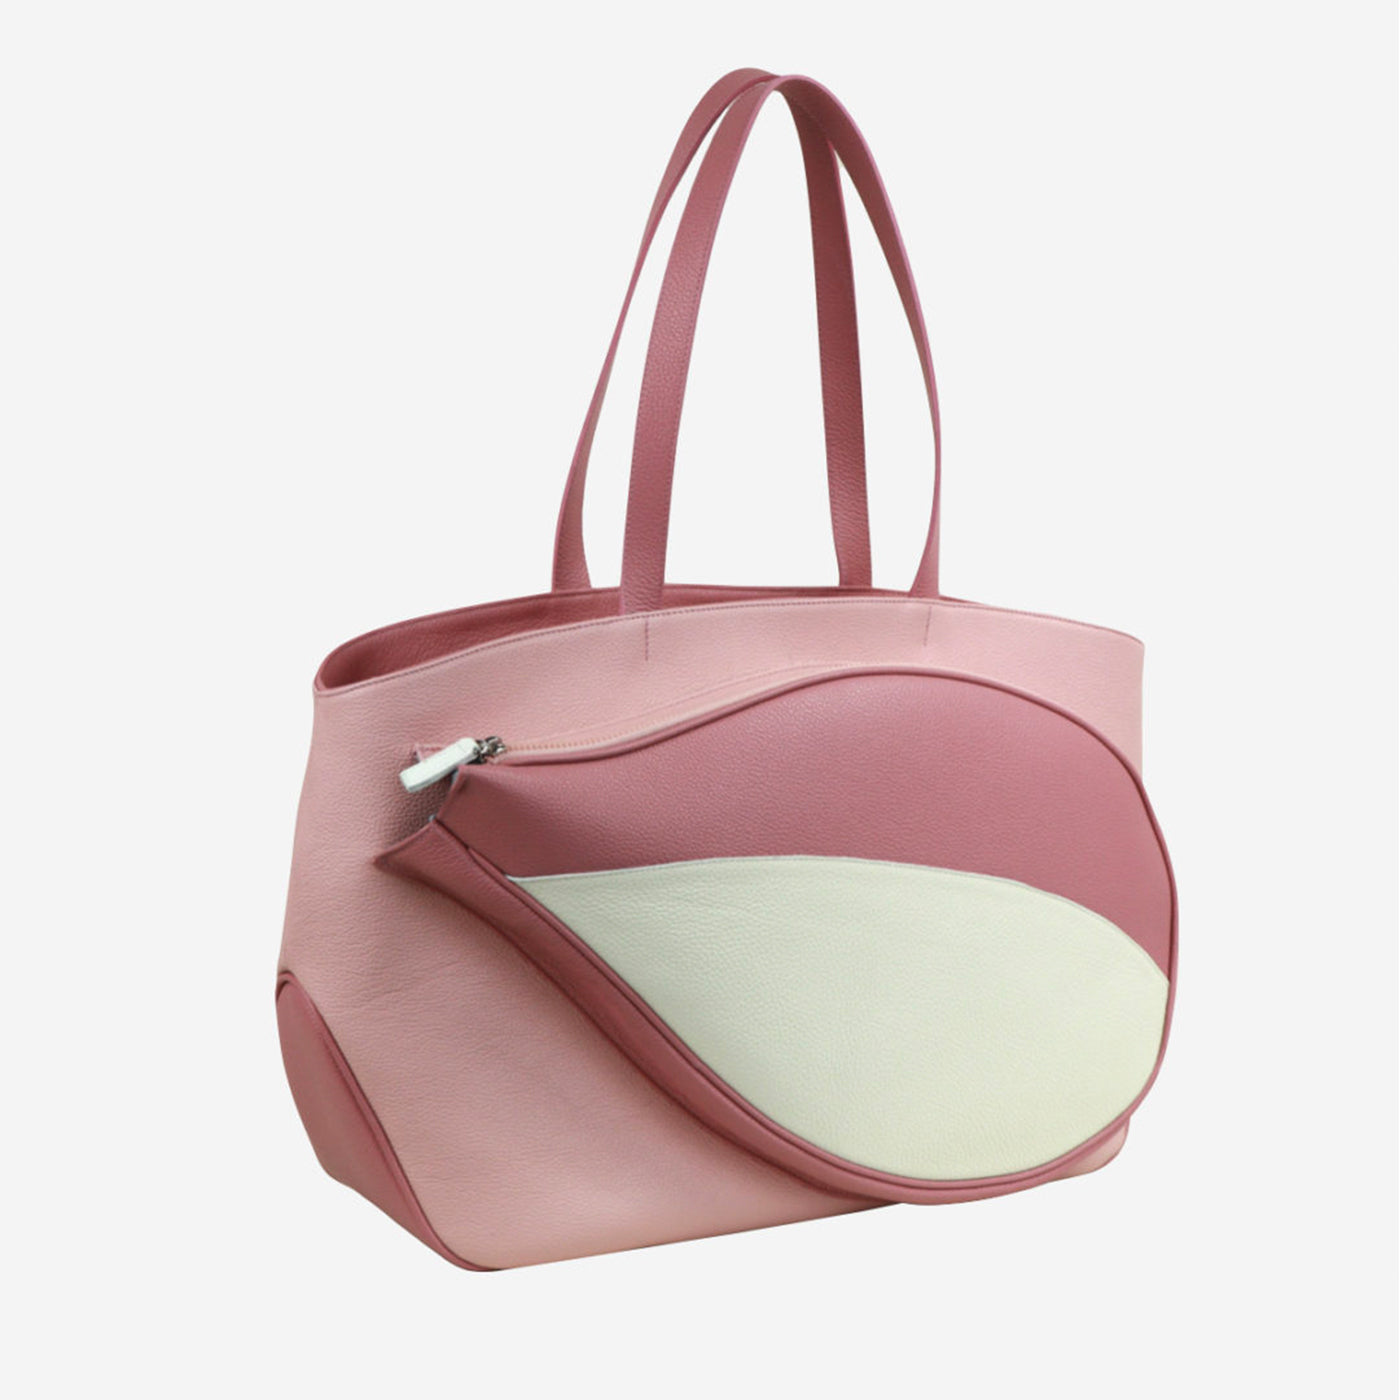 Sport Pink and White Bag With Tennis-Racket-Shaped Pocket - Alternative view 3